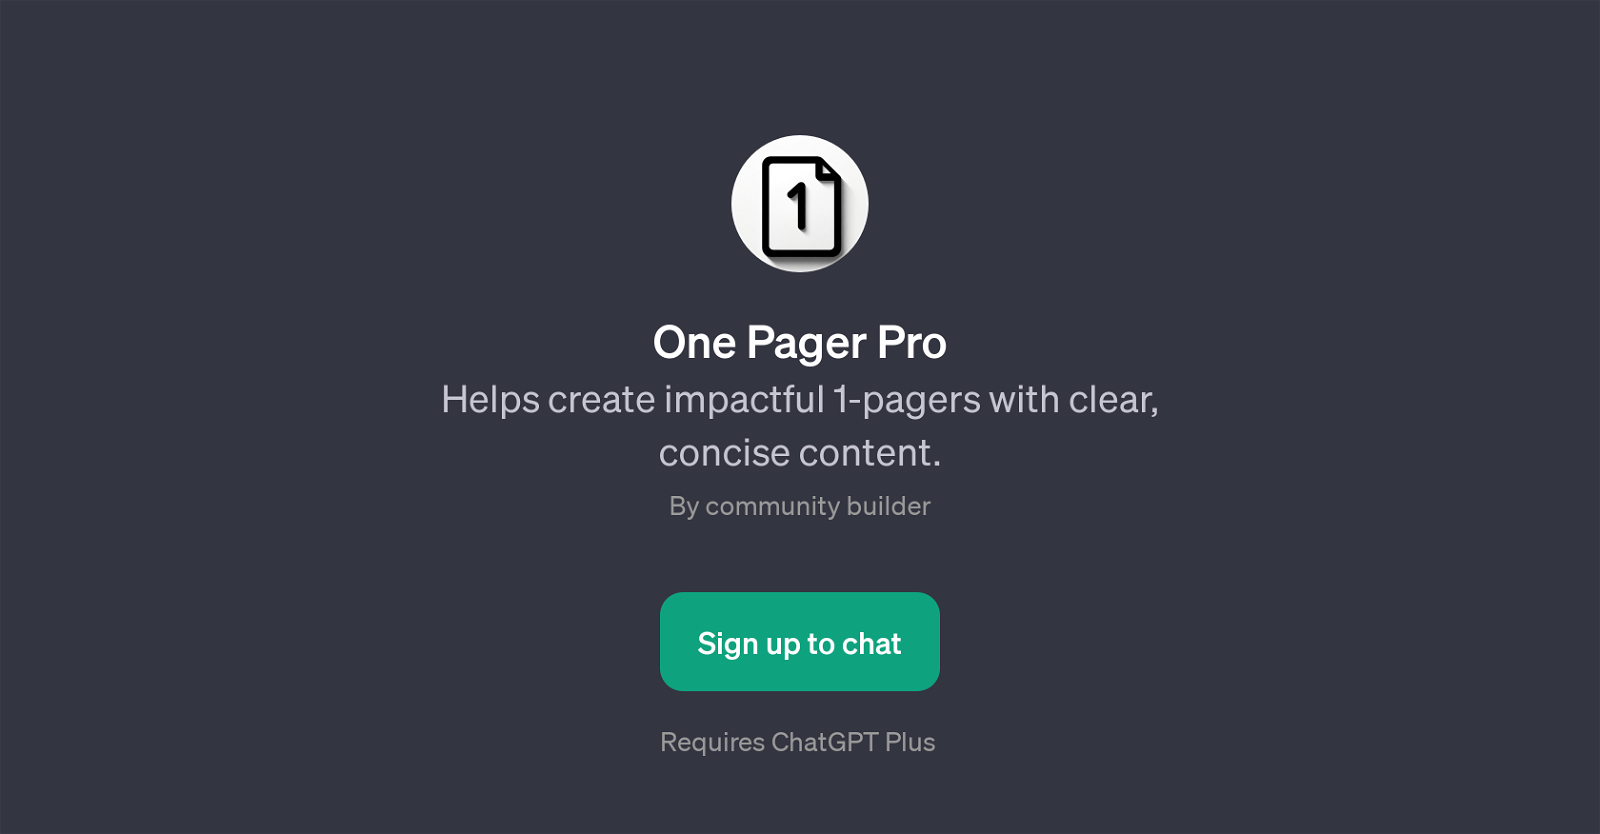 One Pager Pro website